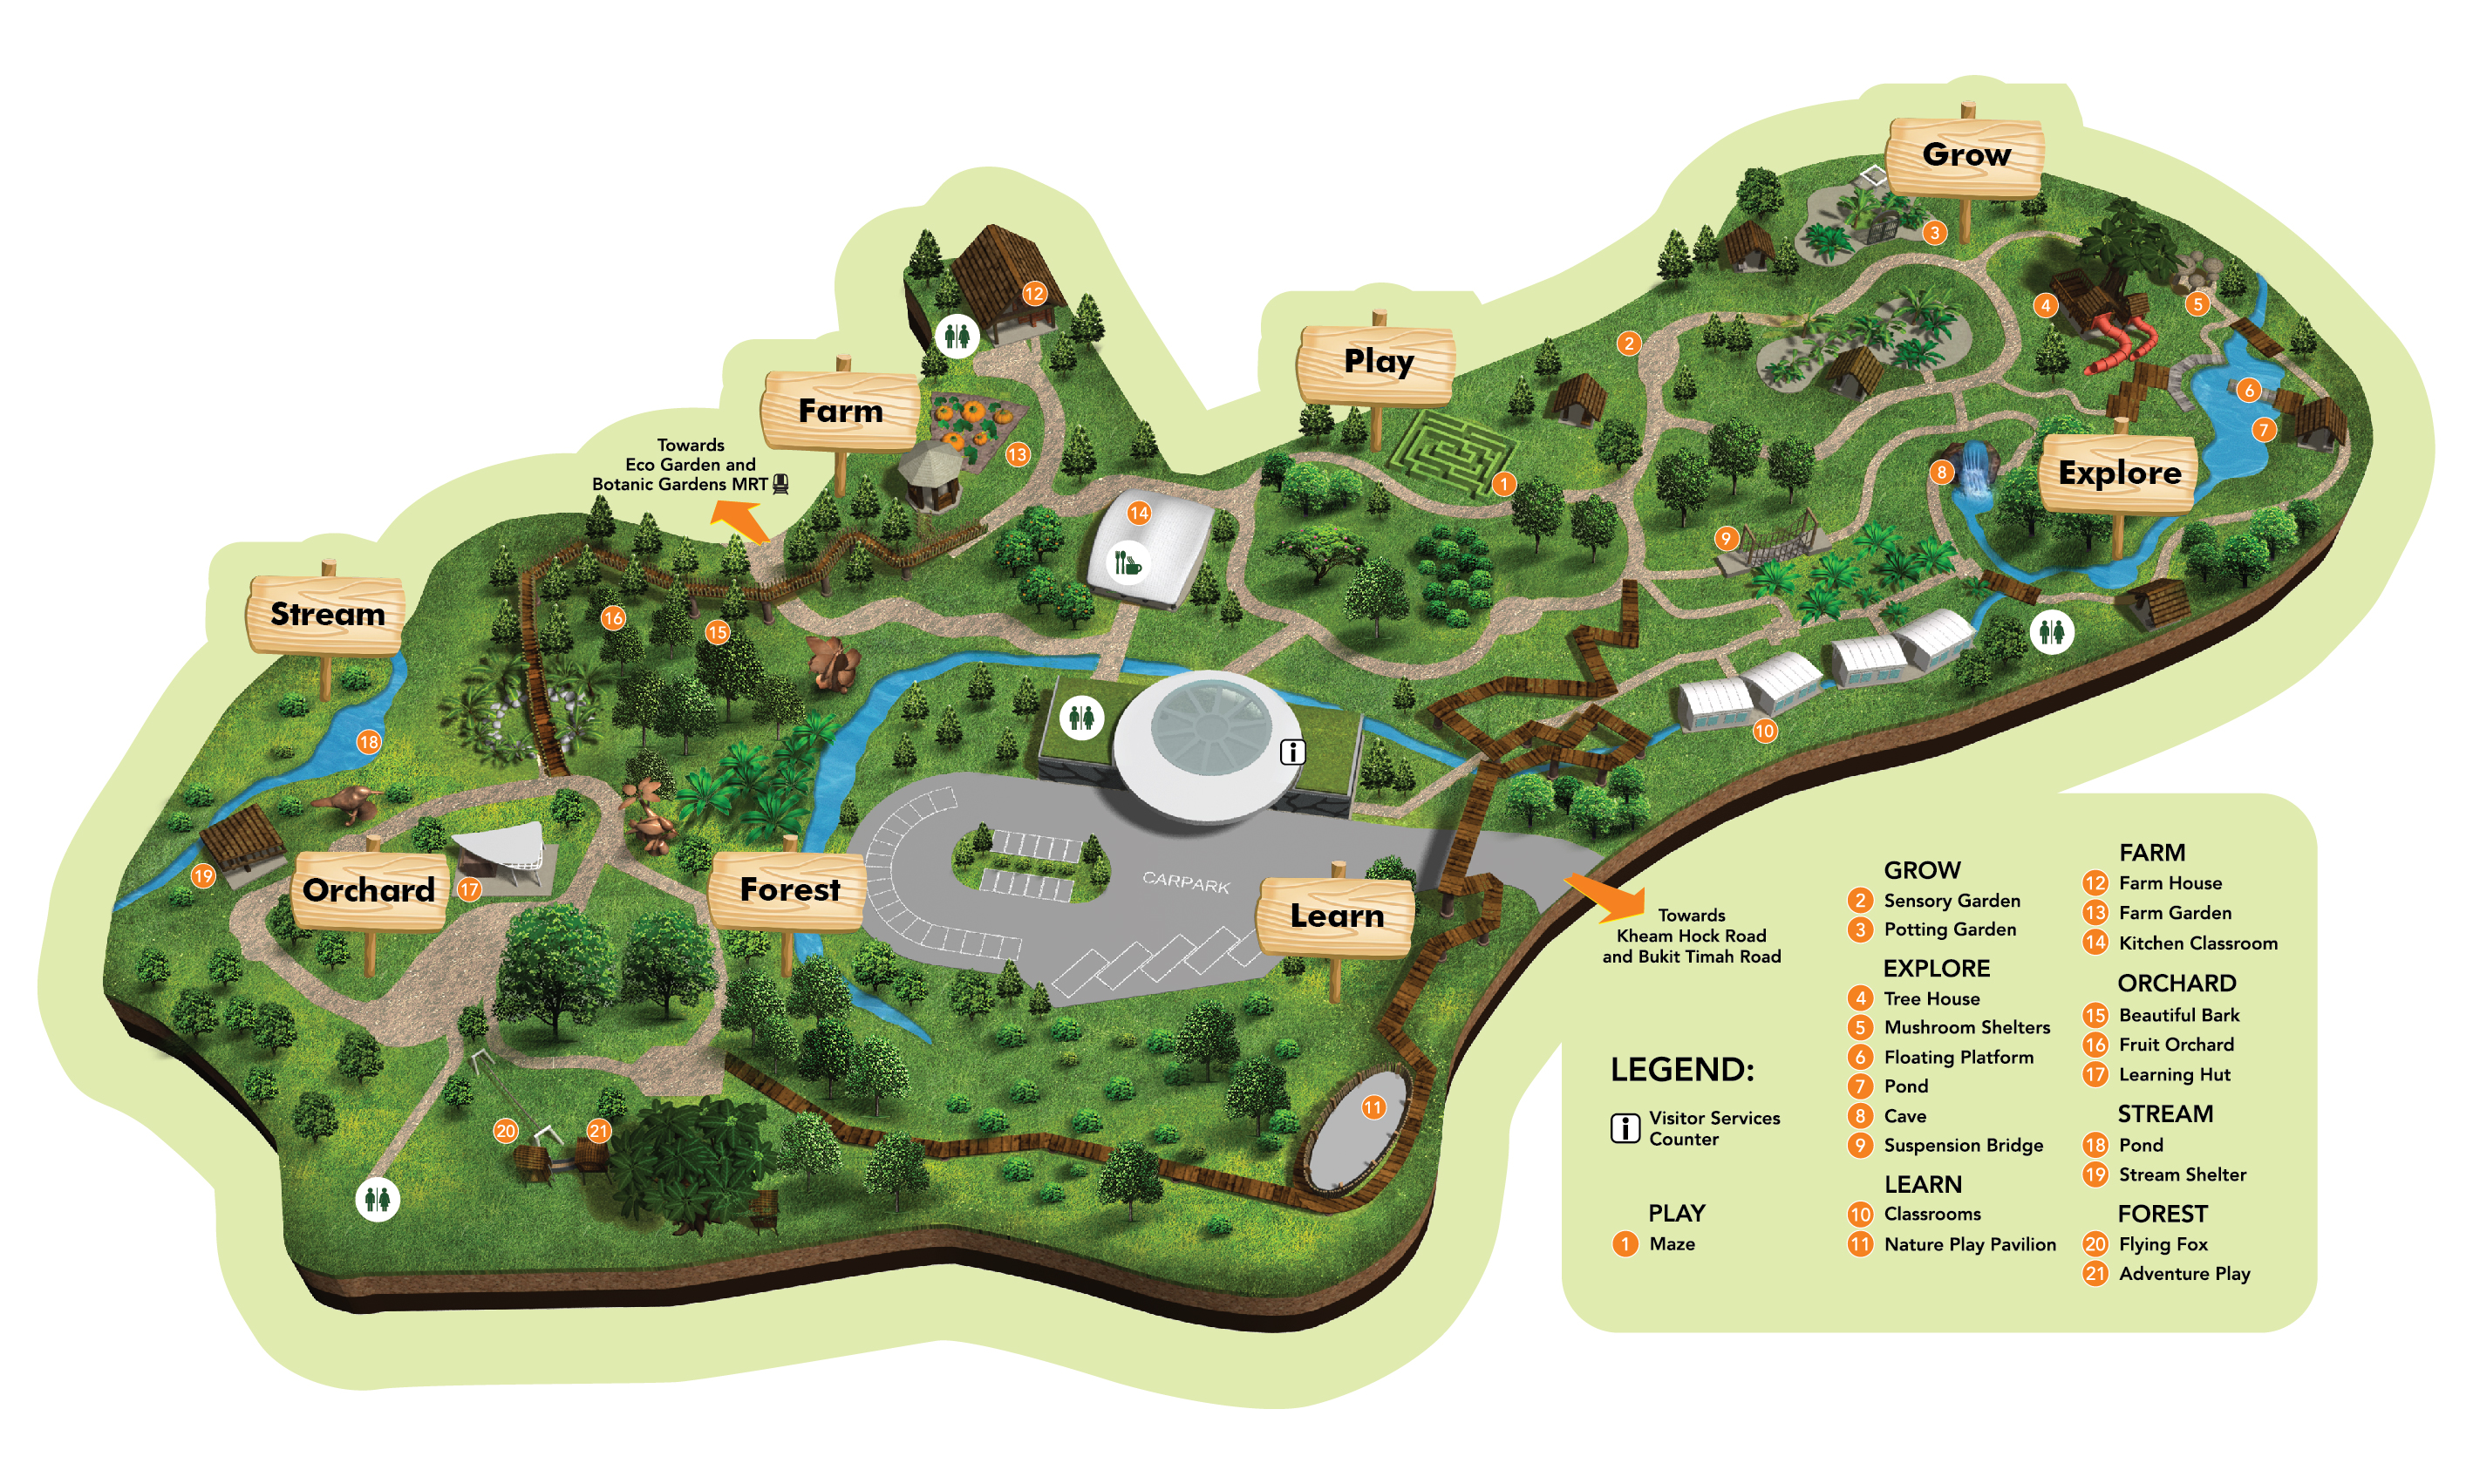 A World of Wonder Awaits Your Family at Jacob Ballas Childrens Garden